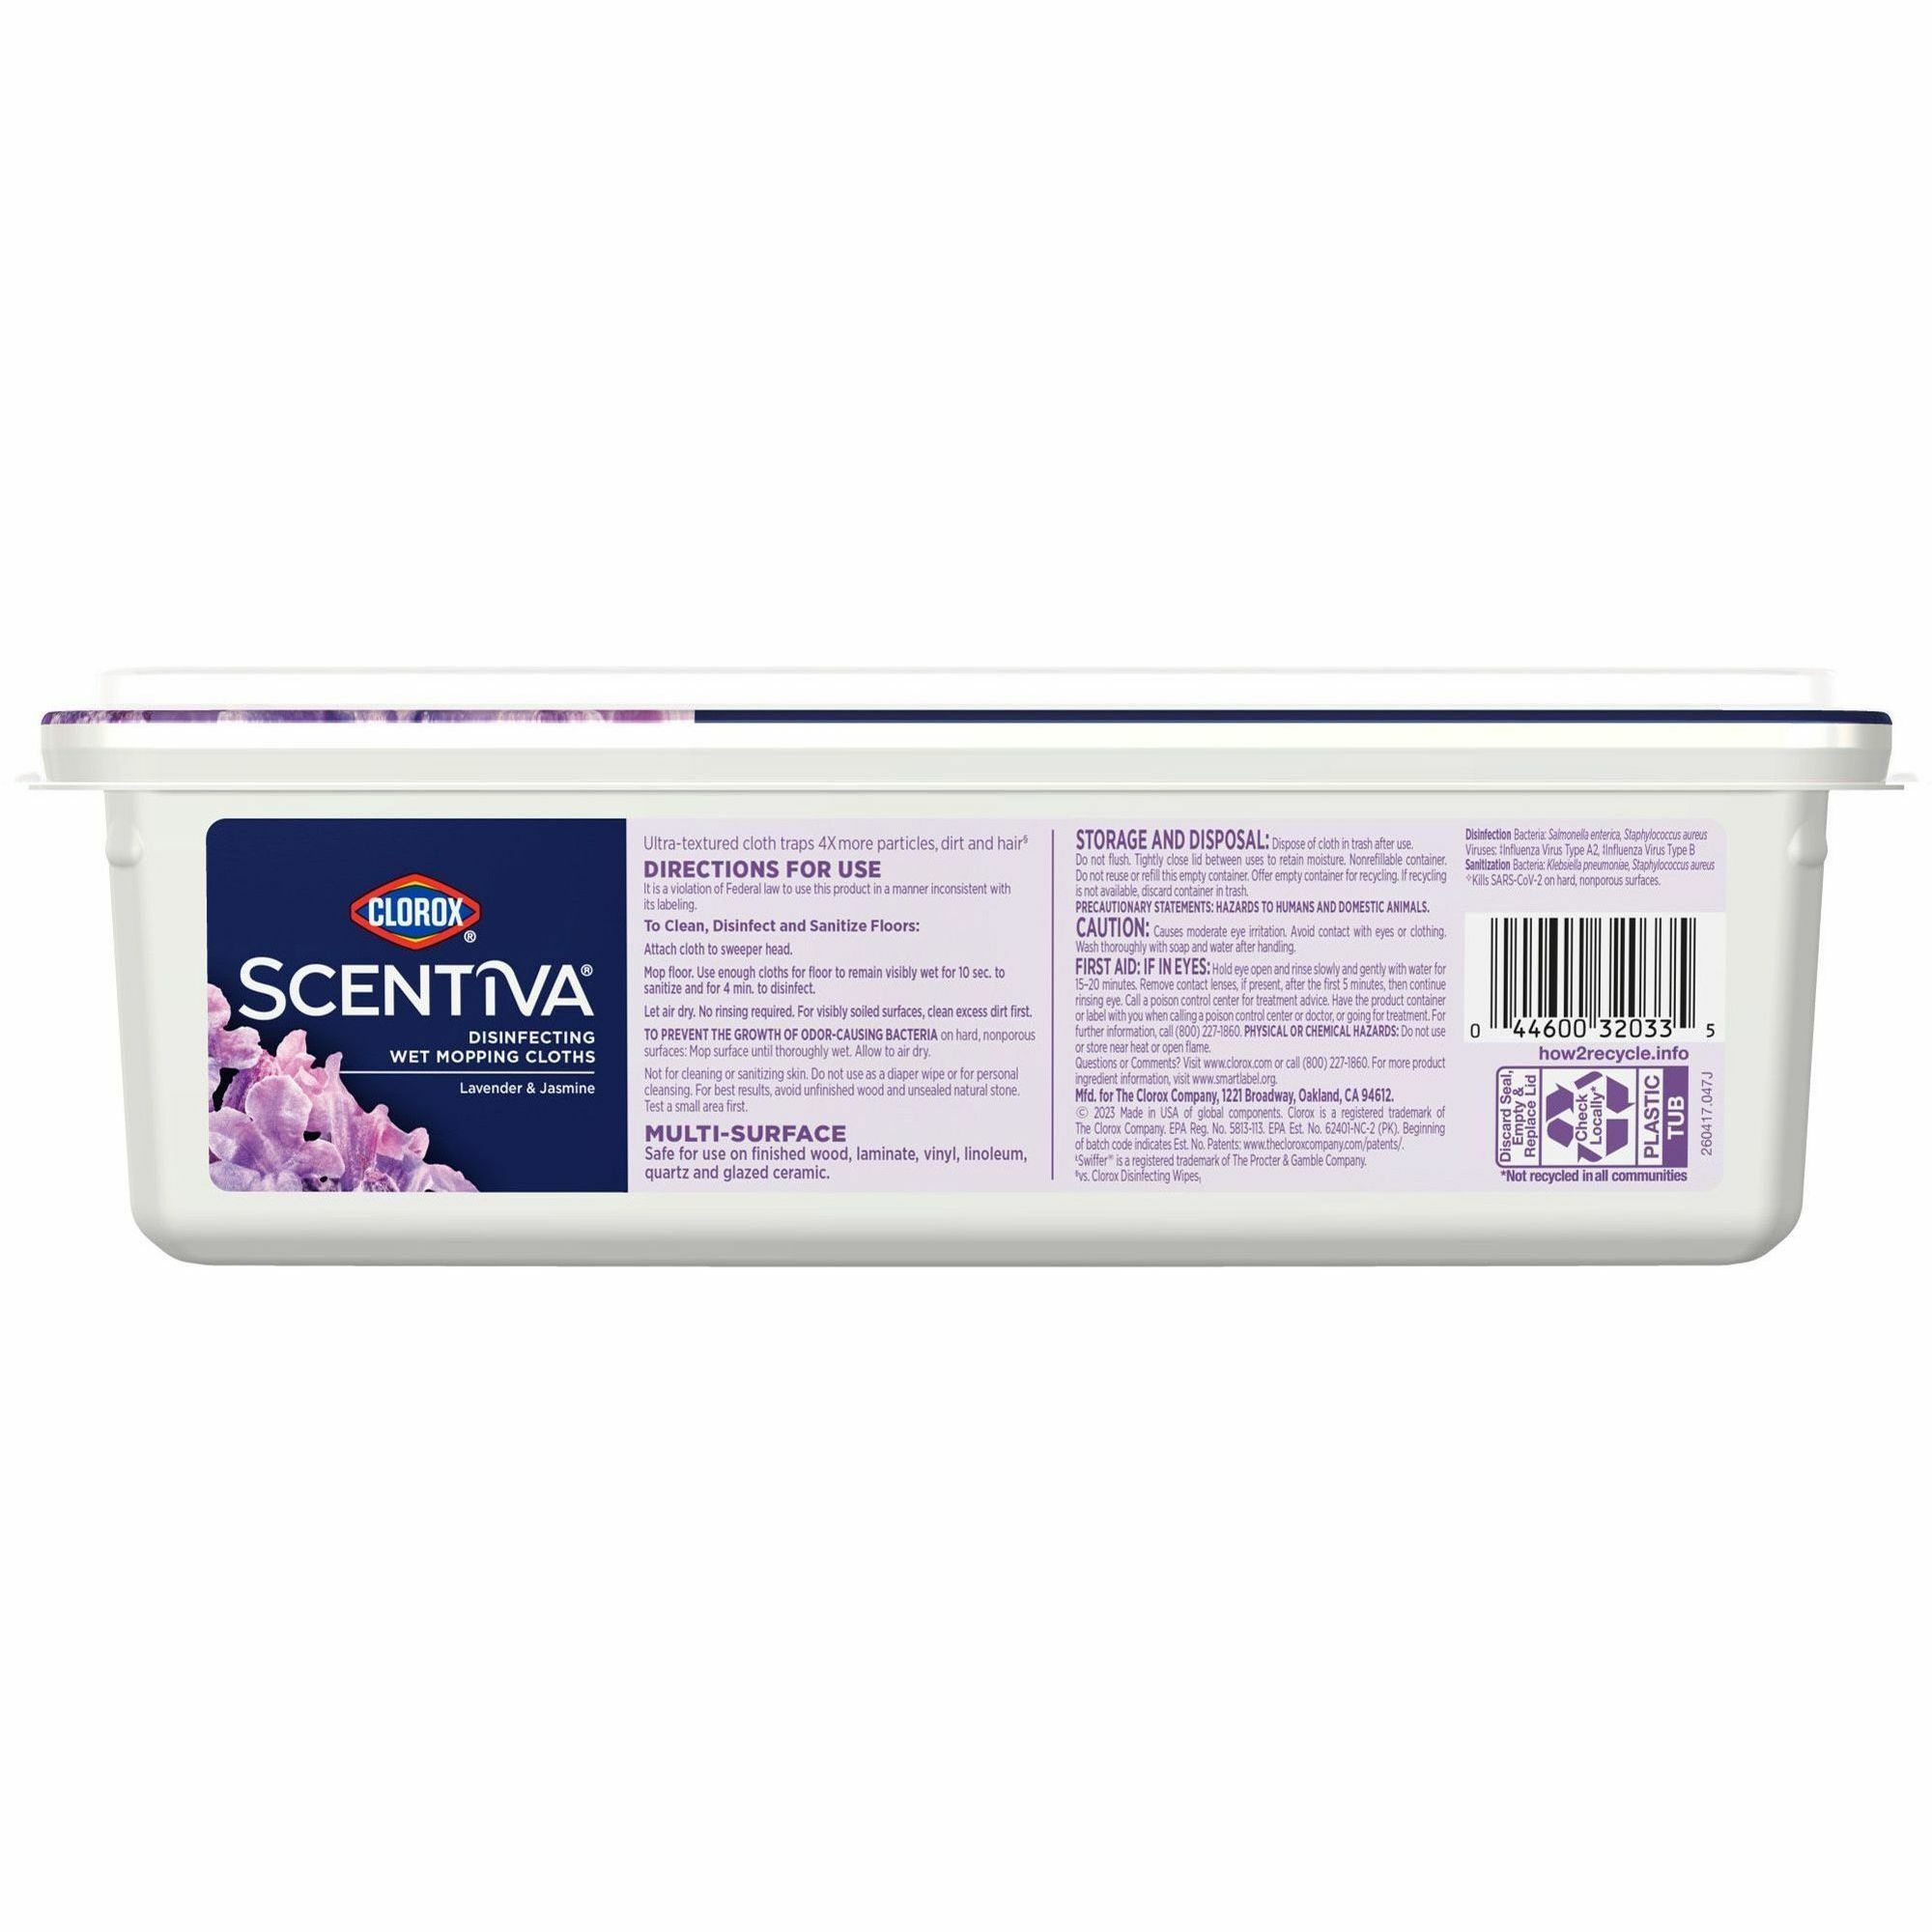 Clorox Scentiva Disinfecting Wet Mopping Cloths 24 Per Pack